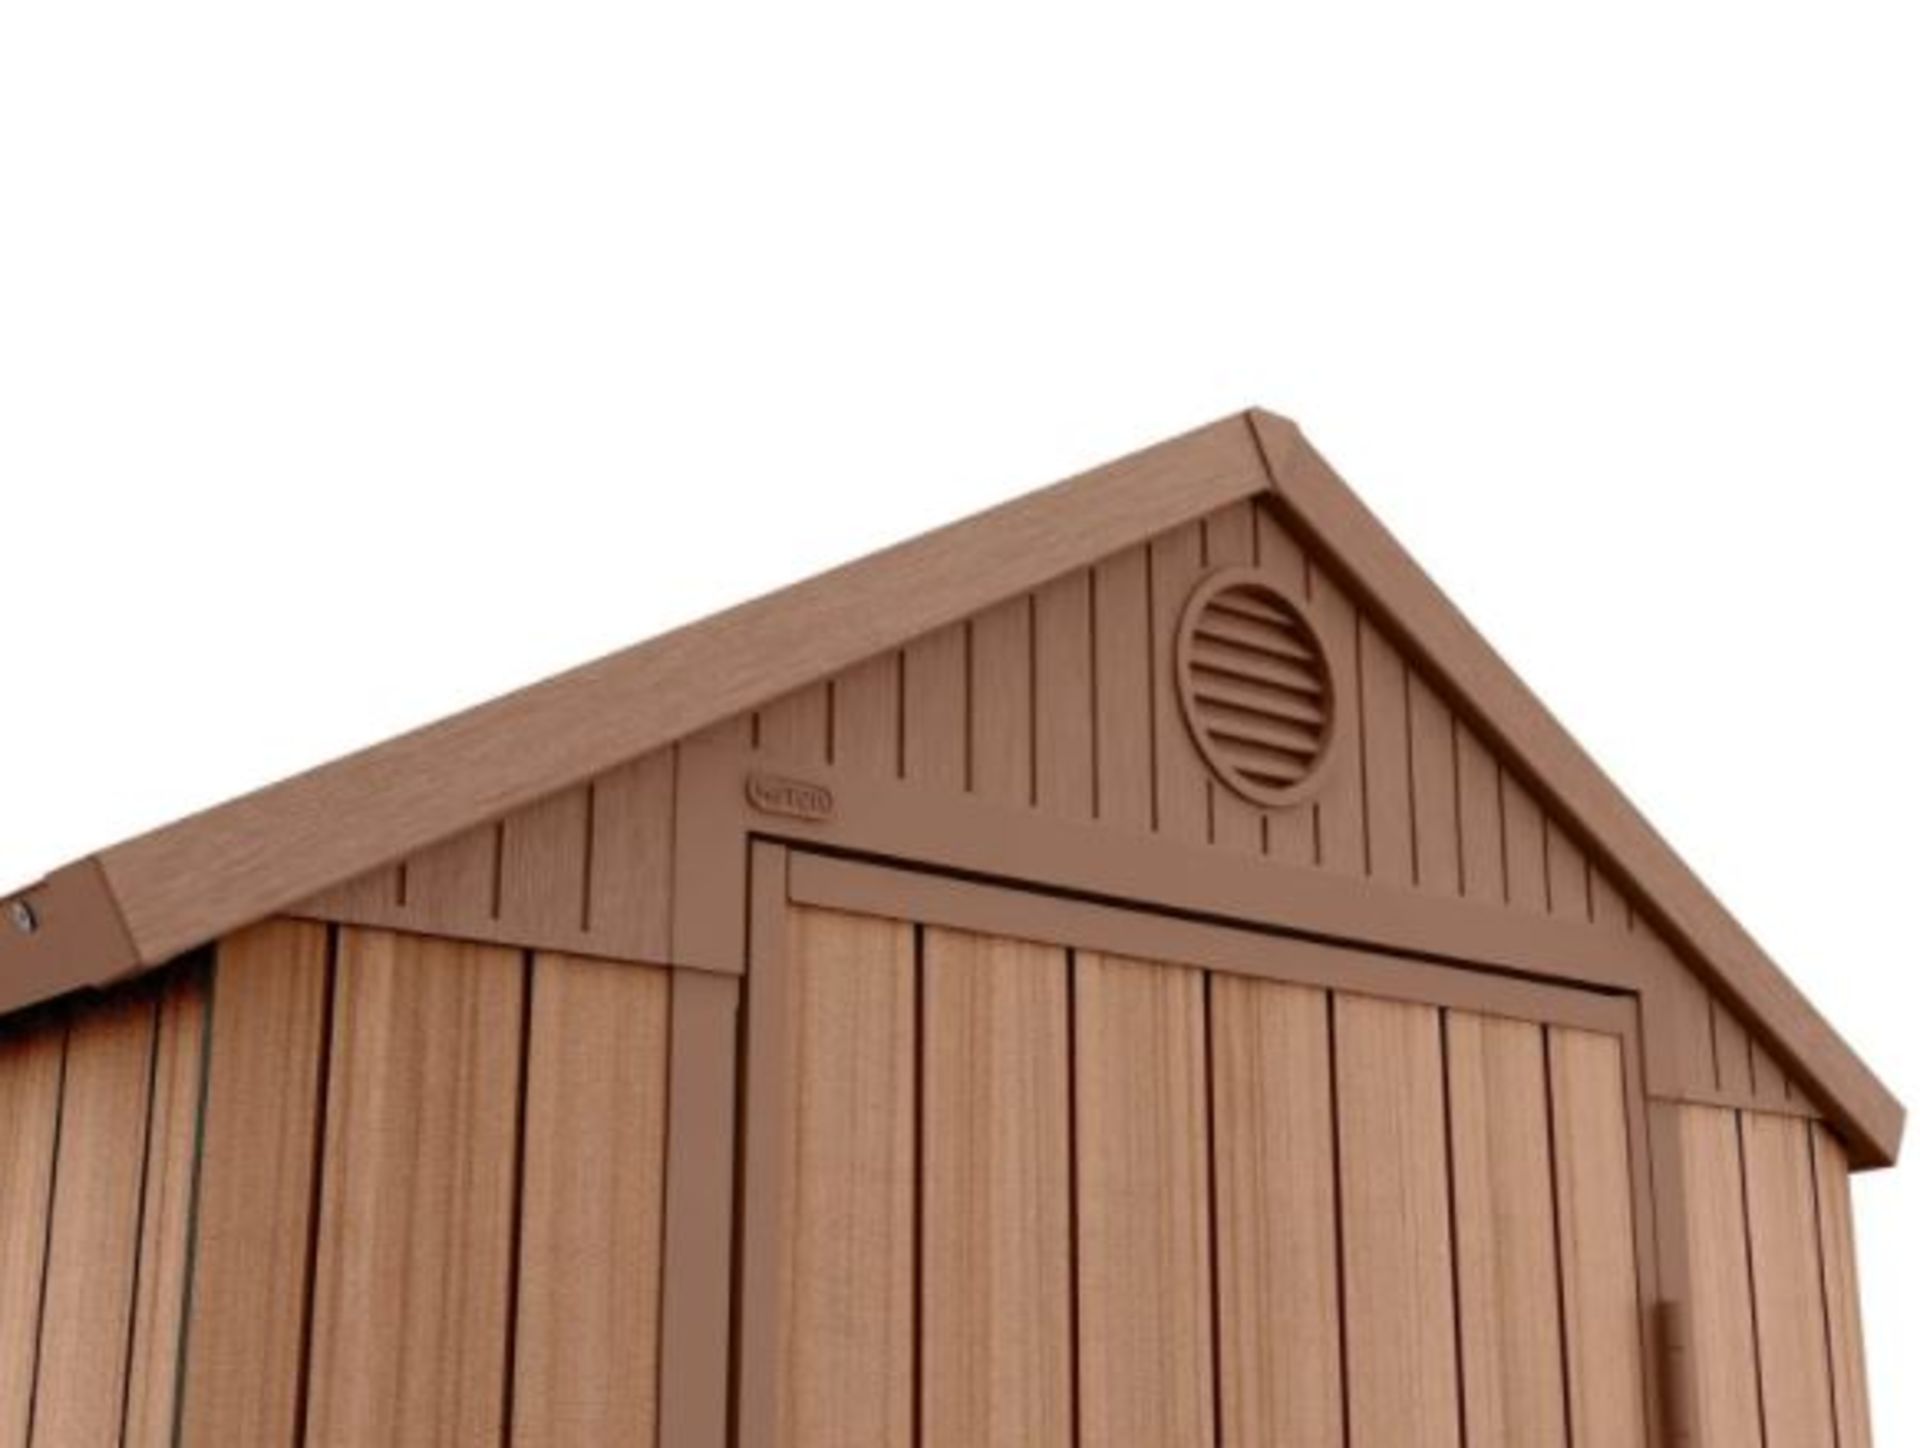 (R16) 1x Keter Darwin 4x6 Outdoor Plastic Garden Shed Brown RRP £340. Dimensions (H)205 x (W)125. - Image 4 of 8